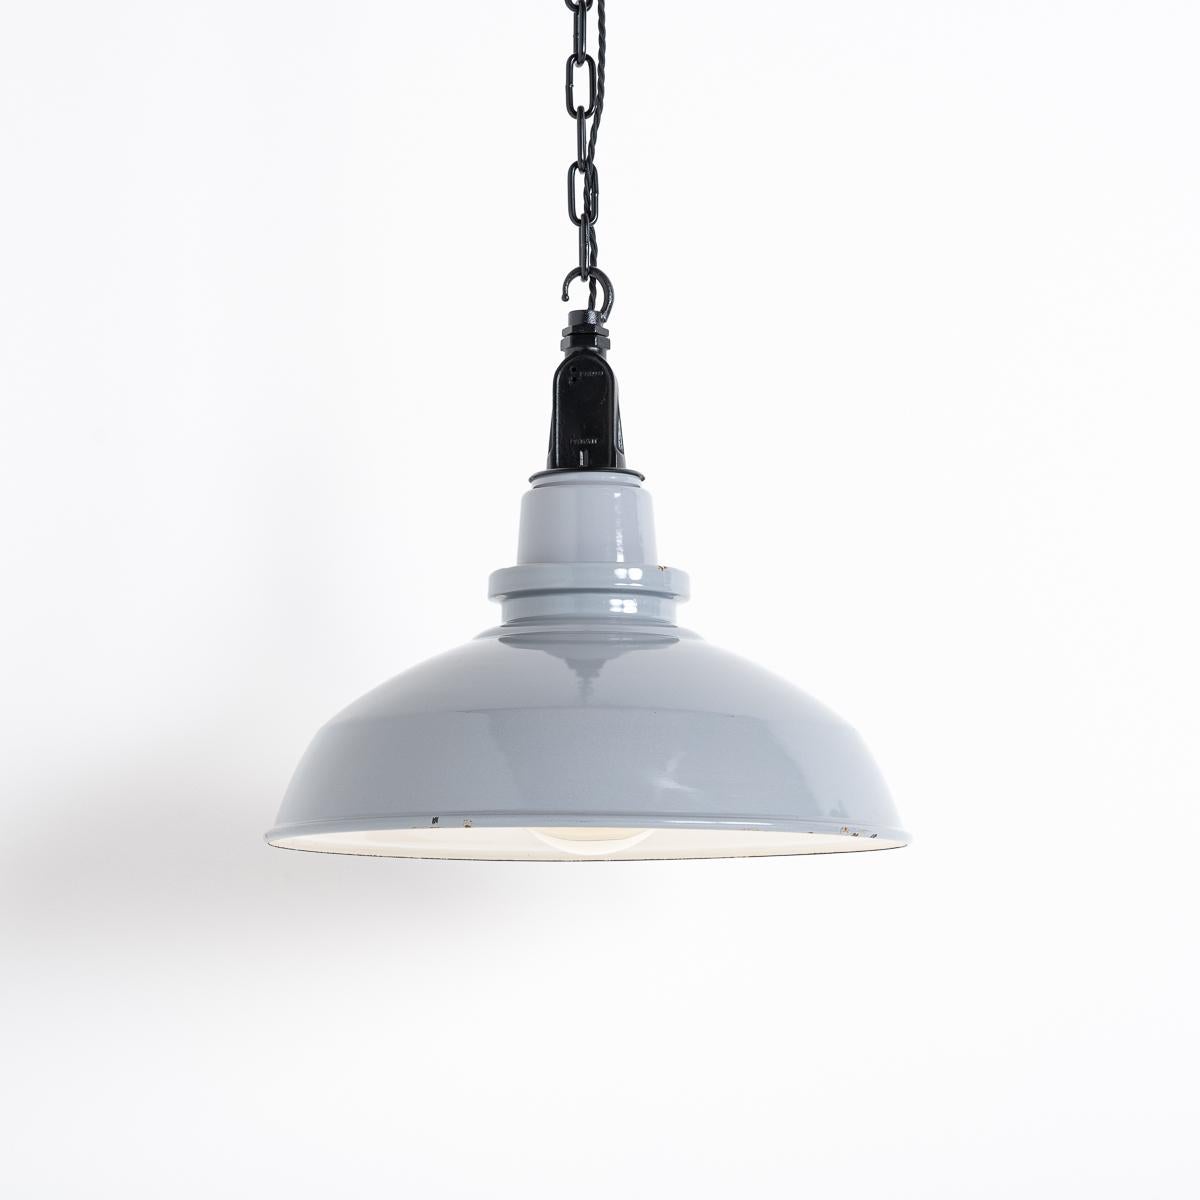 British Reclaimed Grey Enamel Factory Pendant Lights with Black Fittings by Thorlux For Sale